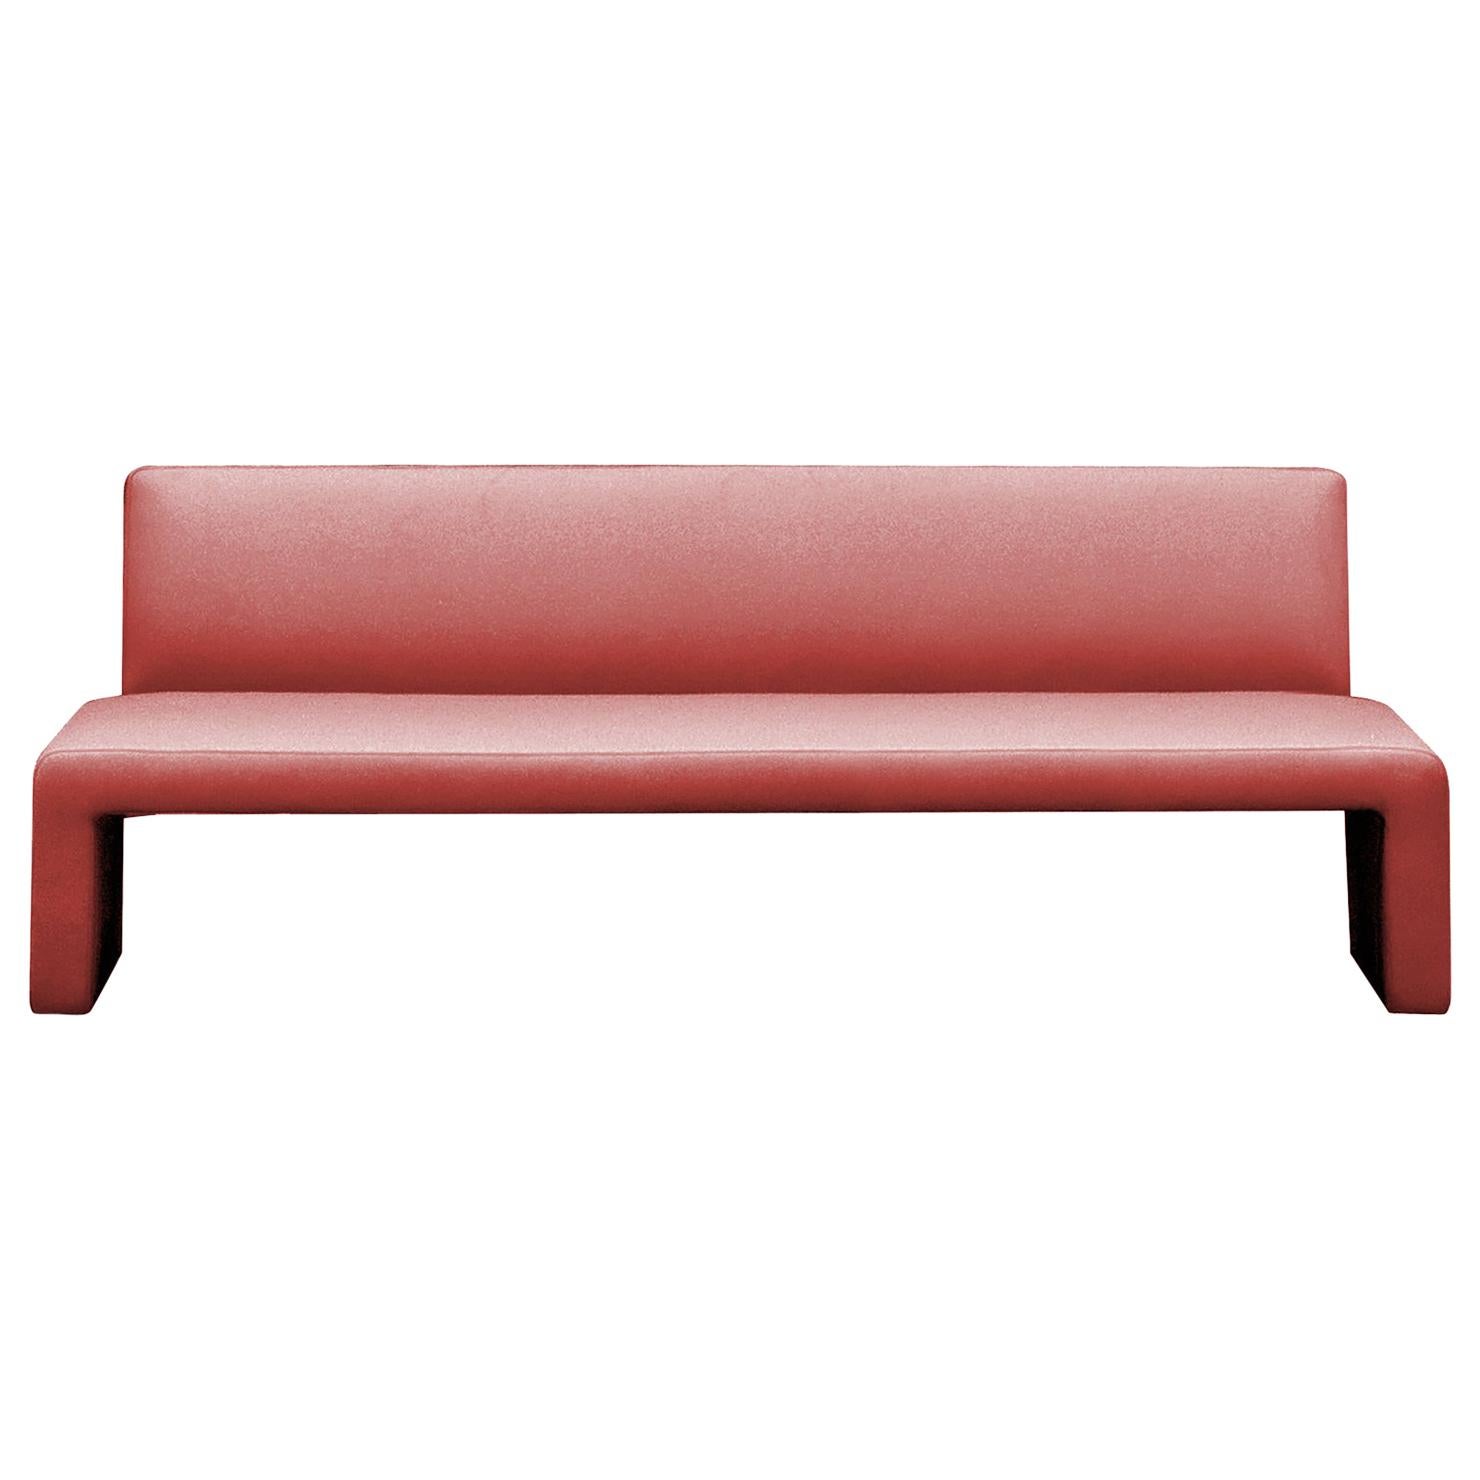 Customizable Tacchini Labanca Bench Designed by  Lievore Altherr Molina